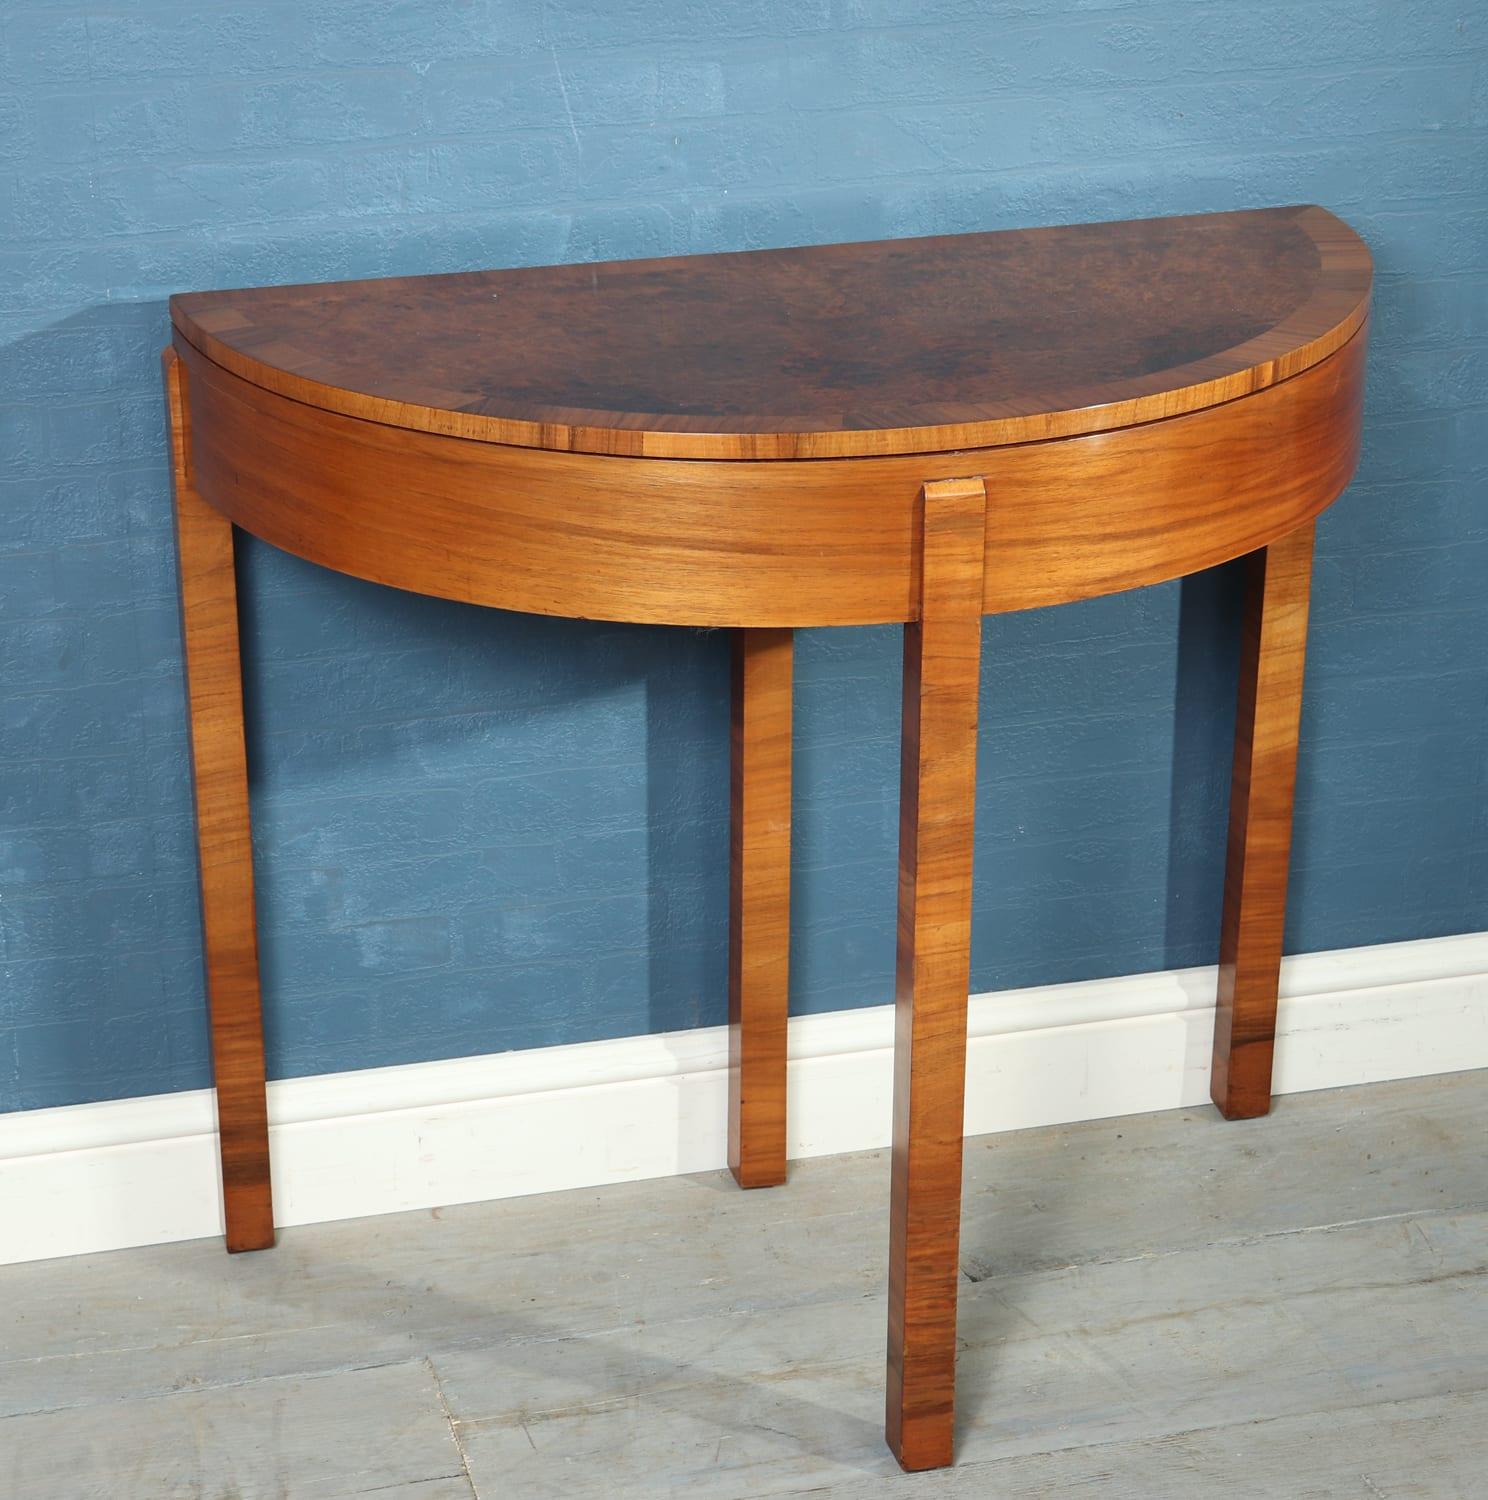 Art Deco walnut card table, circa 1930
A stunning quality, walnut demilune card table from the Art Deco period. This has a flip over, burr walnut, cross-banded top with pullout drawer / leg at the back to store cards and games. This table makes the